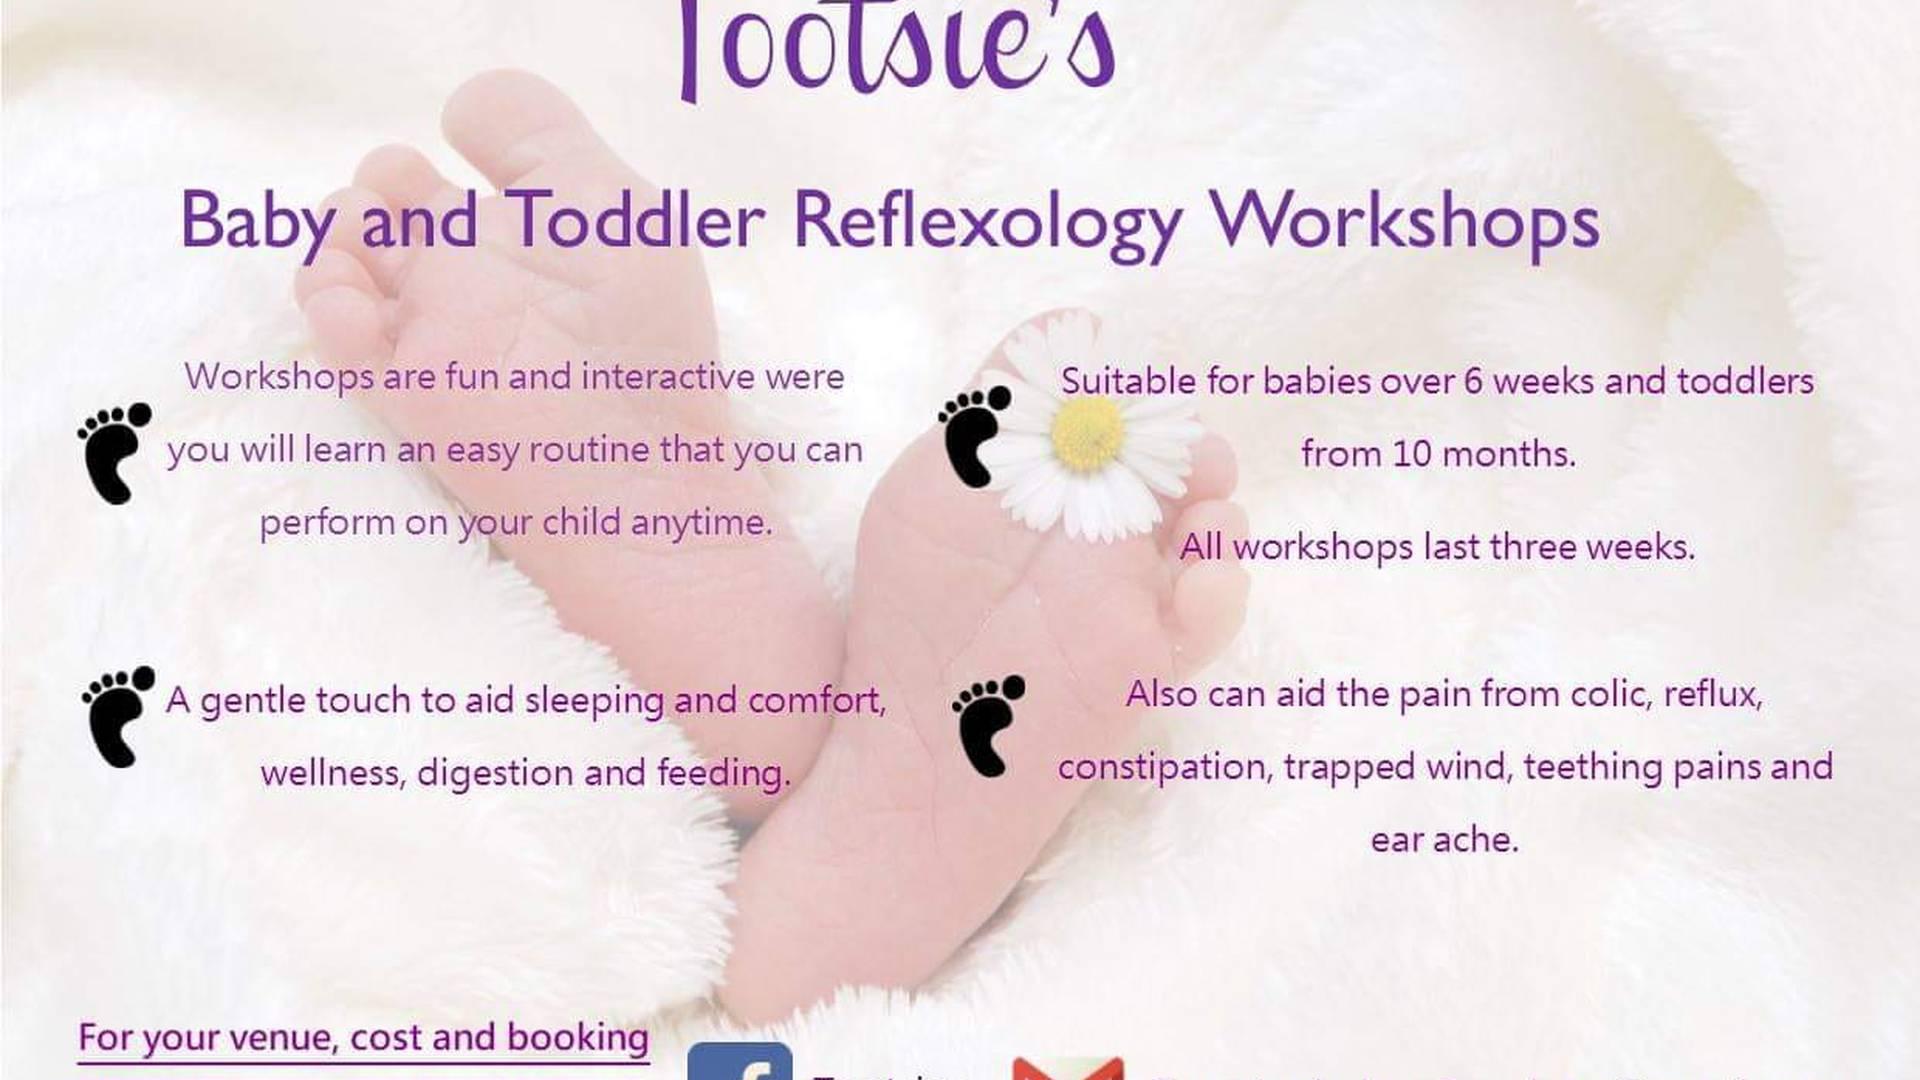 Tootsie's Baby and Toddler Reflexology Workshops photo